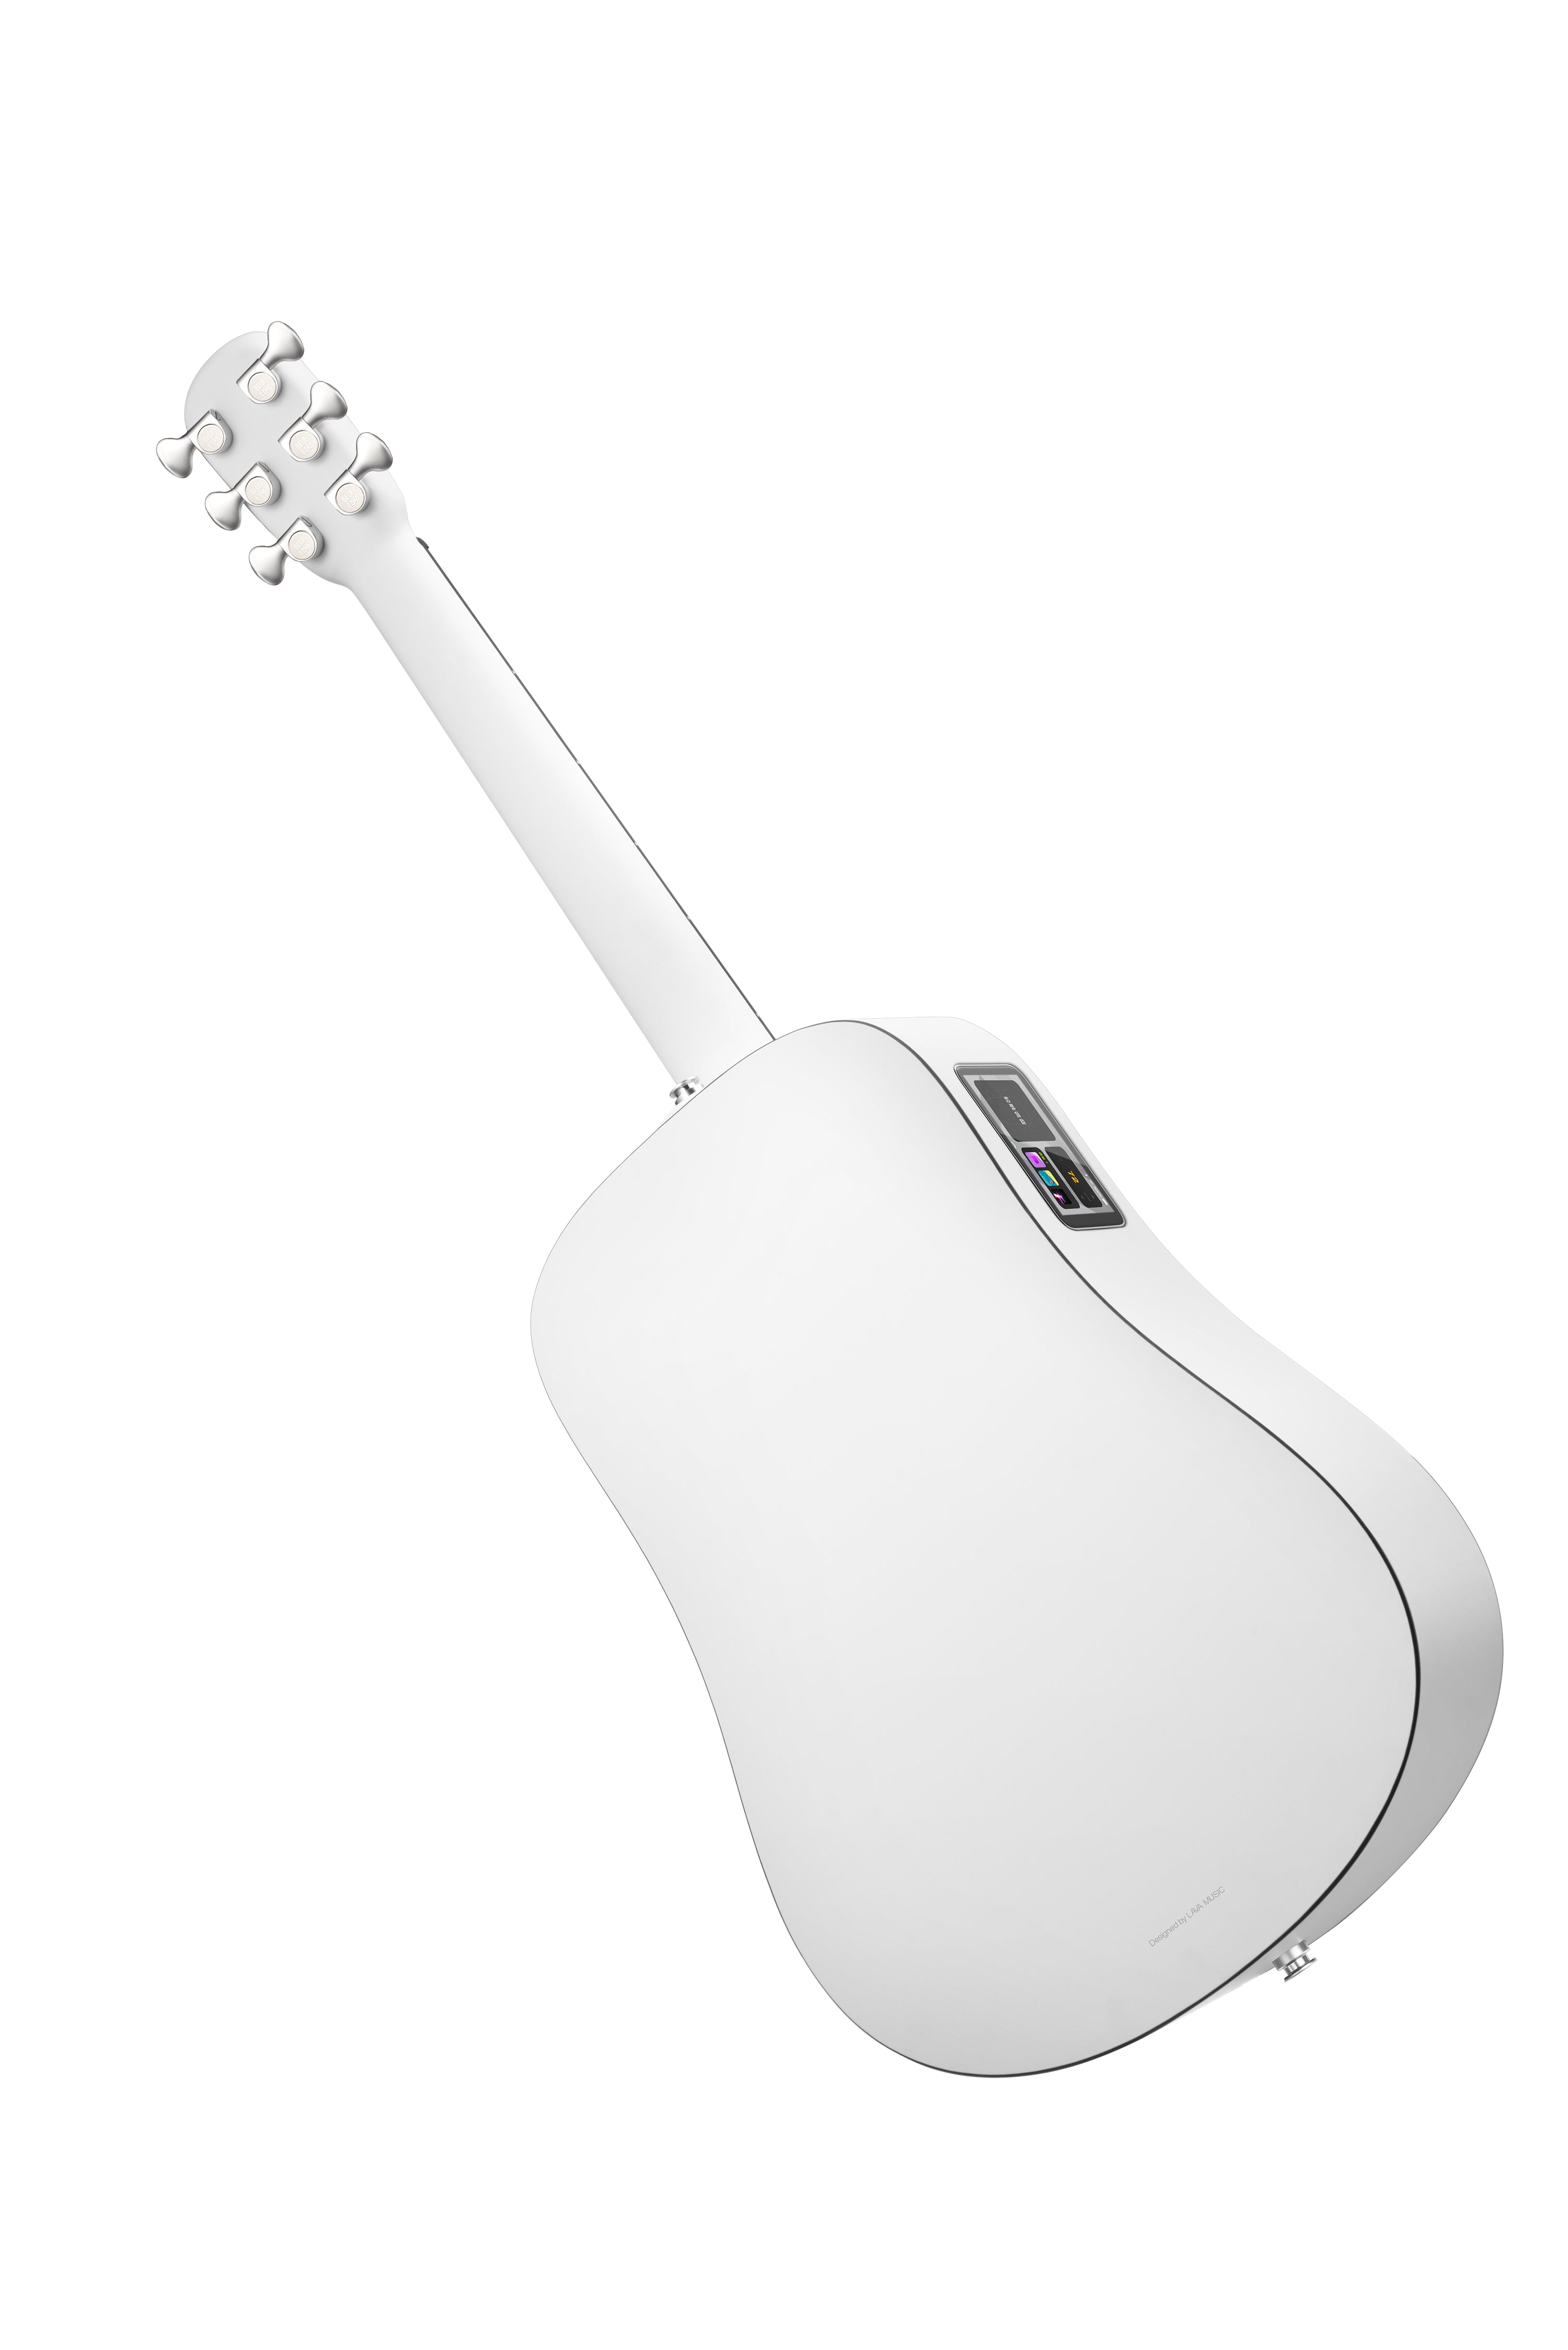 BLUE LAVA TOUCH with Lite Bag ~ Sail White, Acoustic Guitar for sale at Richards Guitars.